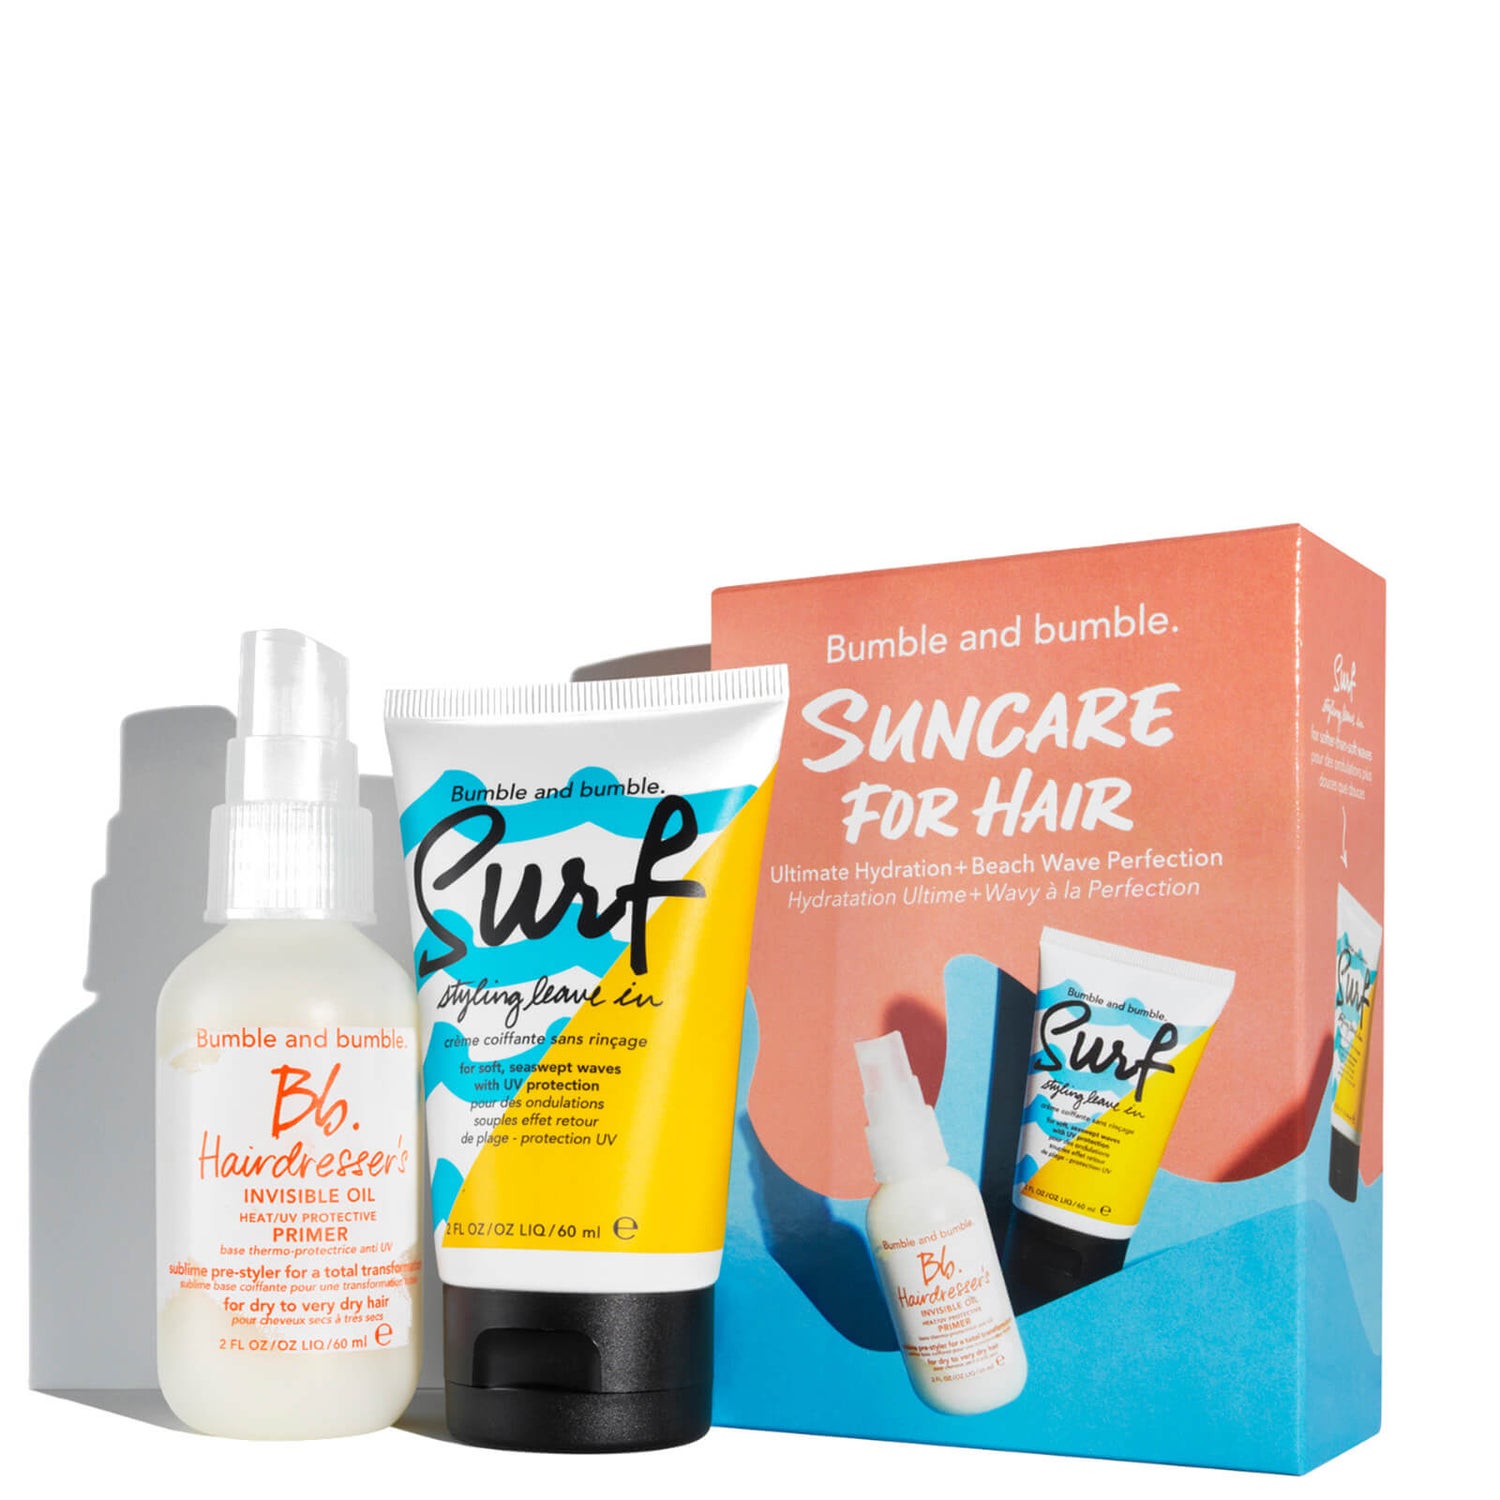 Bumble and bumble Suncare for Hair Set (Worth £24.00)